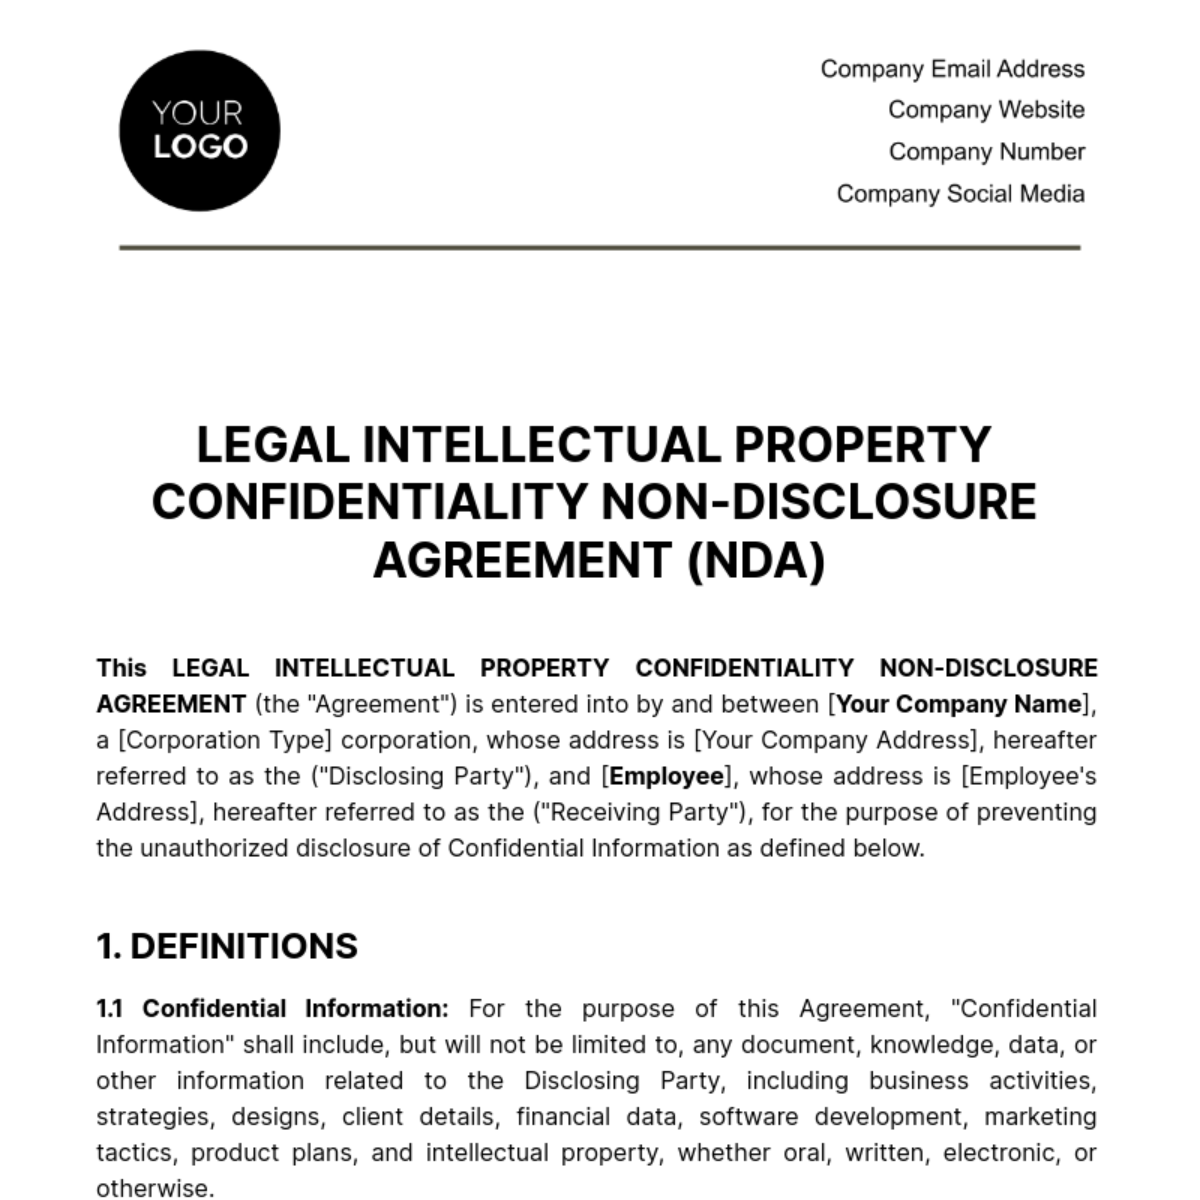 Free Legal Intellectual Property Confidentiality (NDA) Template